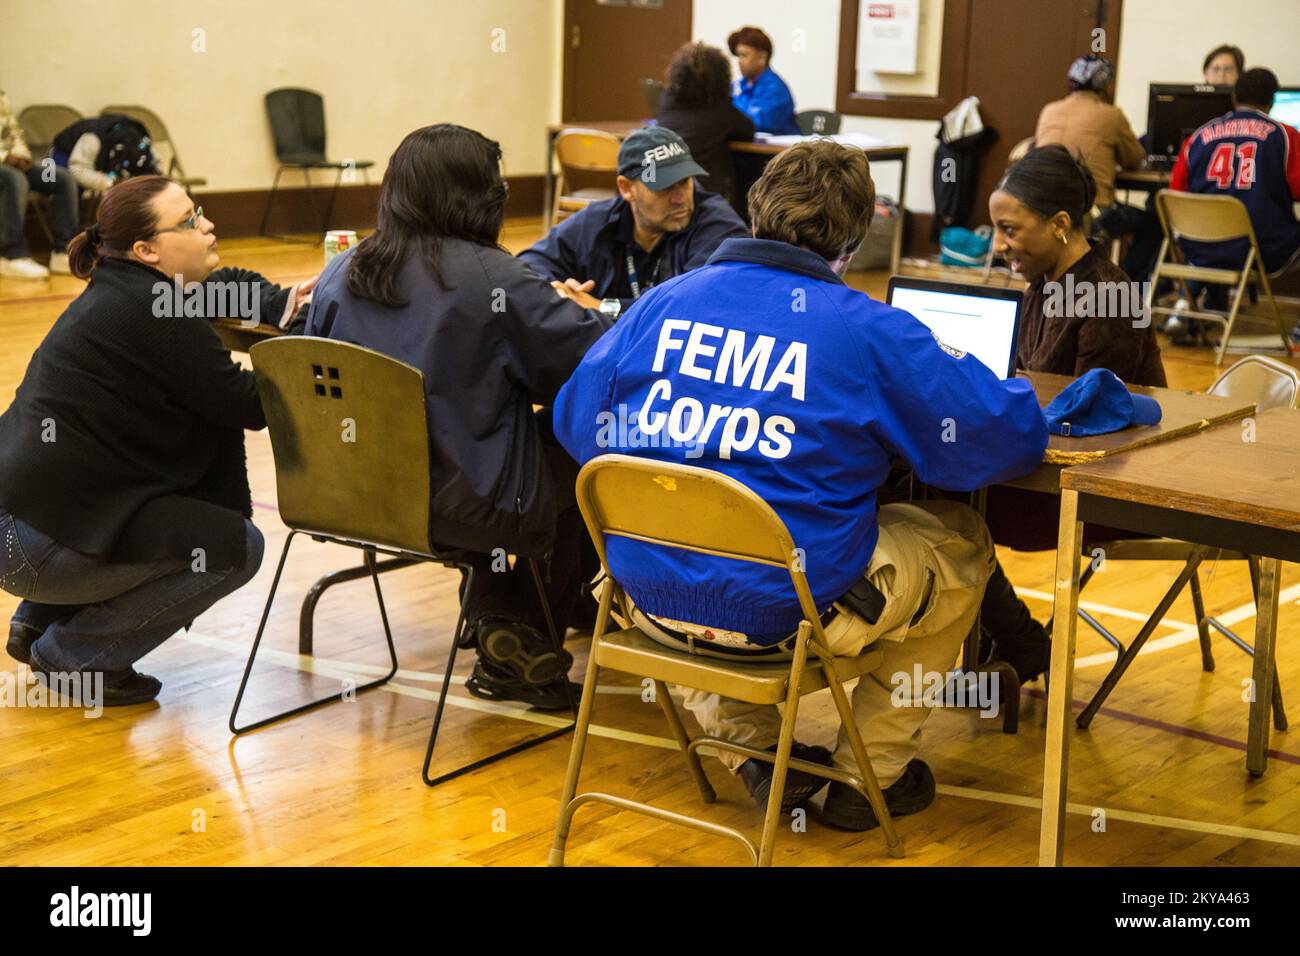 Highland Park, MI, October 4, 2014 - Dani Carwile (far left, squatting), NPSC DSA Specialist, Cheryl Catching's (left, seated), FEMA Disaster Survivor Assistance Manager, Javier R. Ortiz-Quiles (center), FEMA DSAT Specialist, Forrest Evans (right, blue FEAM Corps jacket), FEMA Corps Spruce 2 DSA Specialist, assist disaster survivor Jolita Cotton (far right, seated) at a Recovery Support Site (RSS) in the gymnasium of the Detroit Rescue Mission Community Center in Highland Park, Michigan after the Detroit metropolitan counties of Oakland, Wayne and Macomb were adversely impacted by severe storm Stock Photo